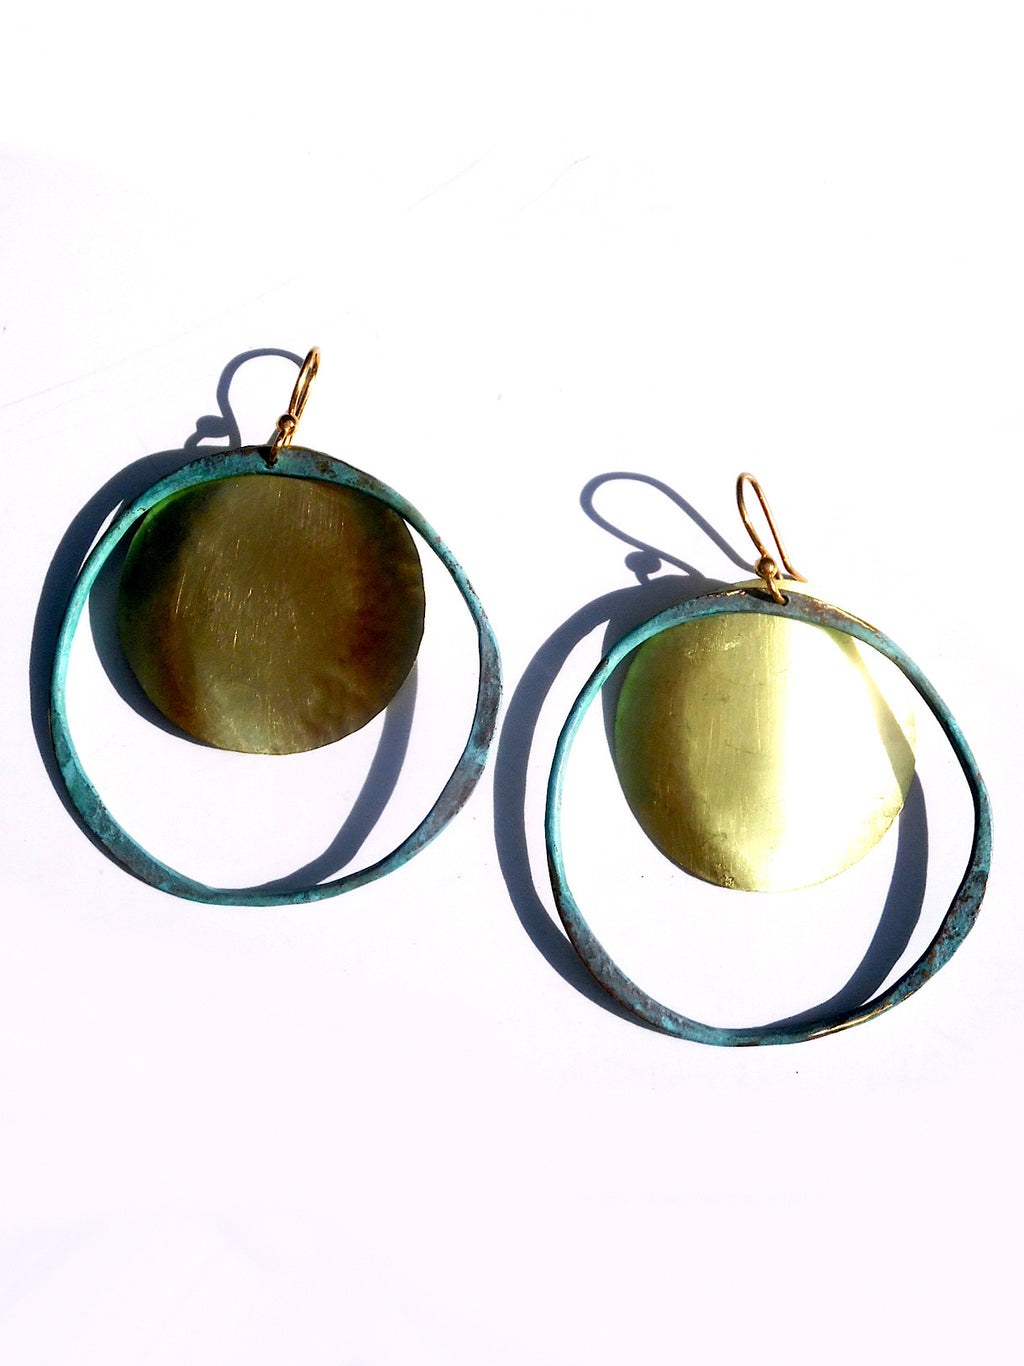 Earrings Hoop And Disc Patina And Gold On Brass